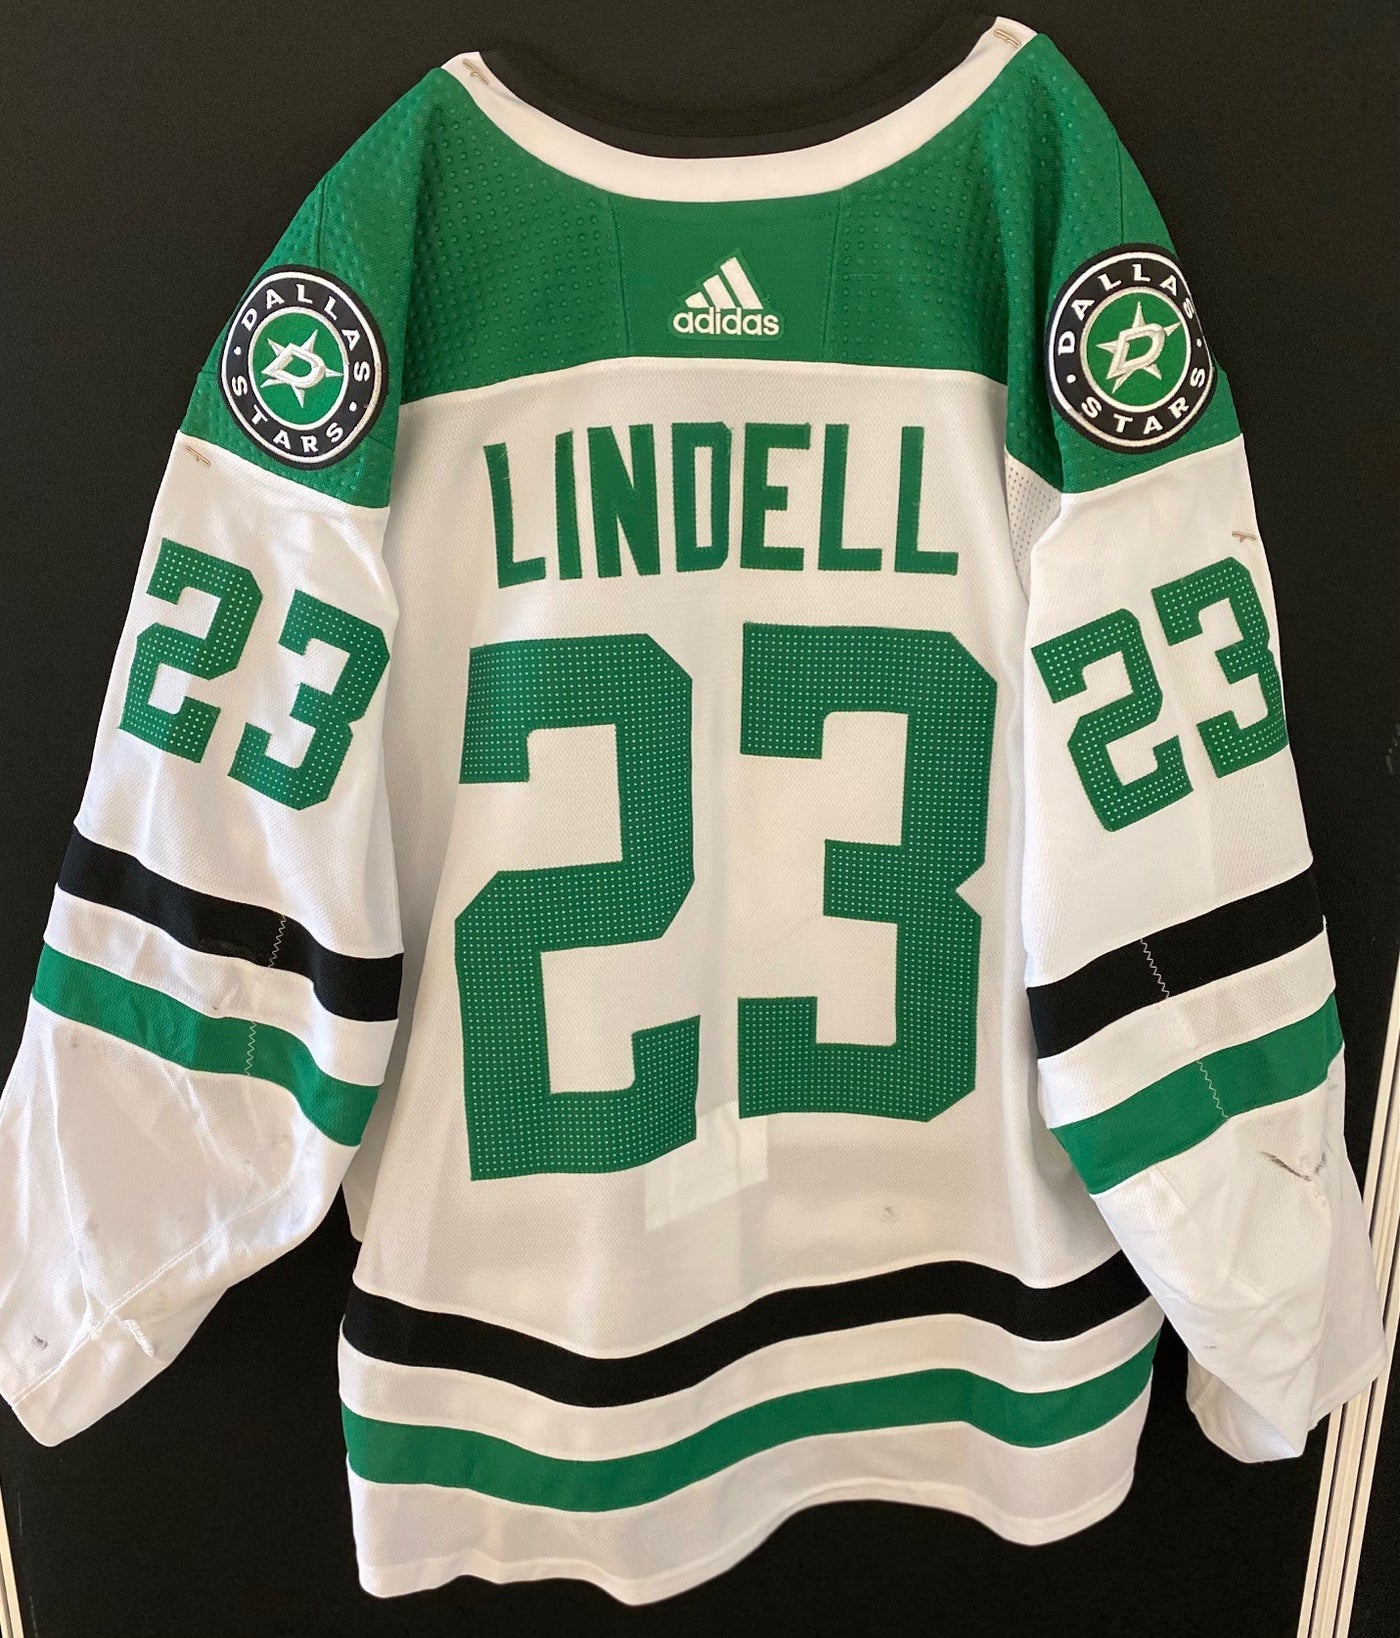 Esa Lindell 20/21 Away Set 1 Game Worn Jersey in Green and White - Back View